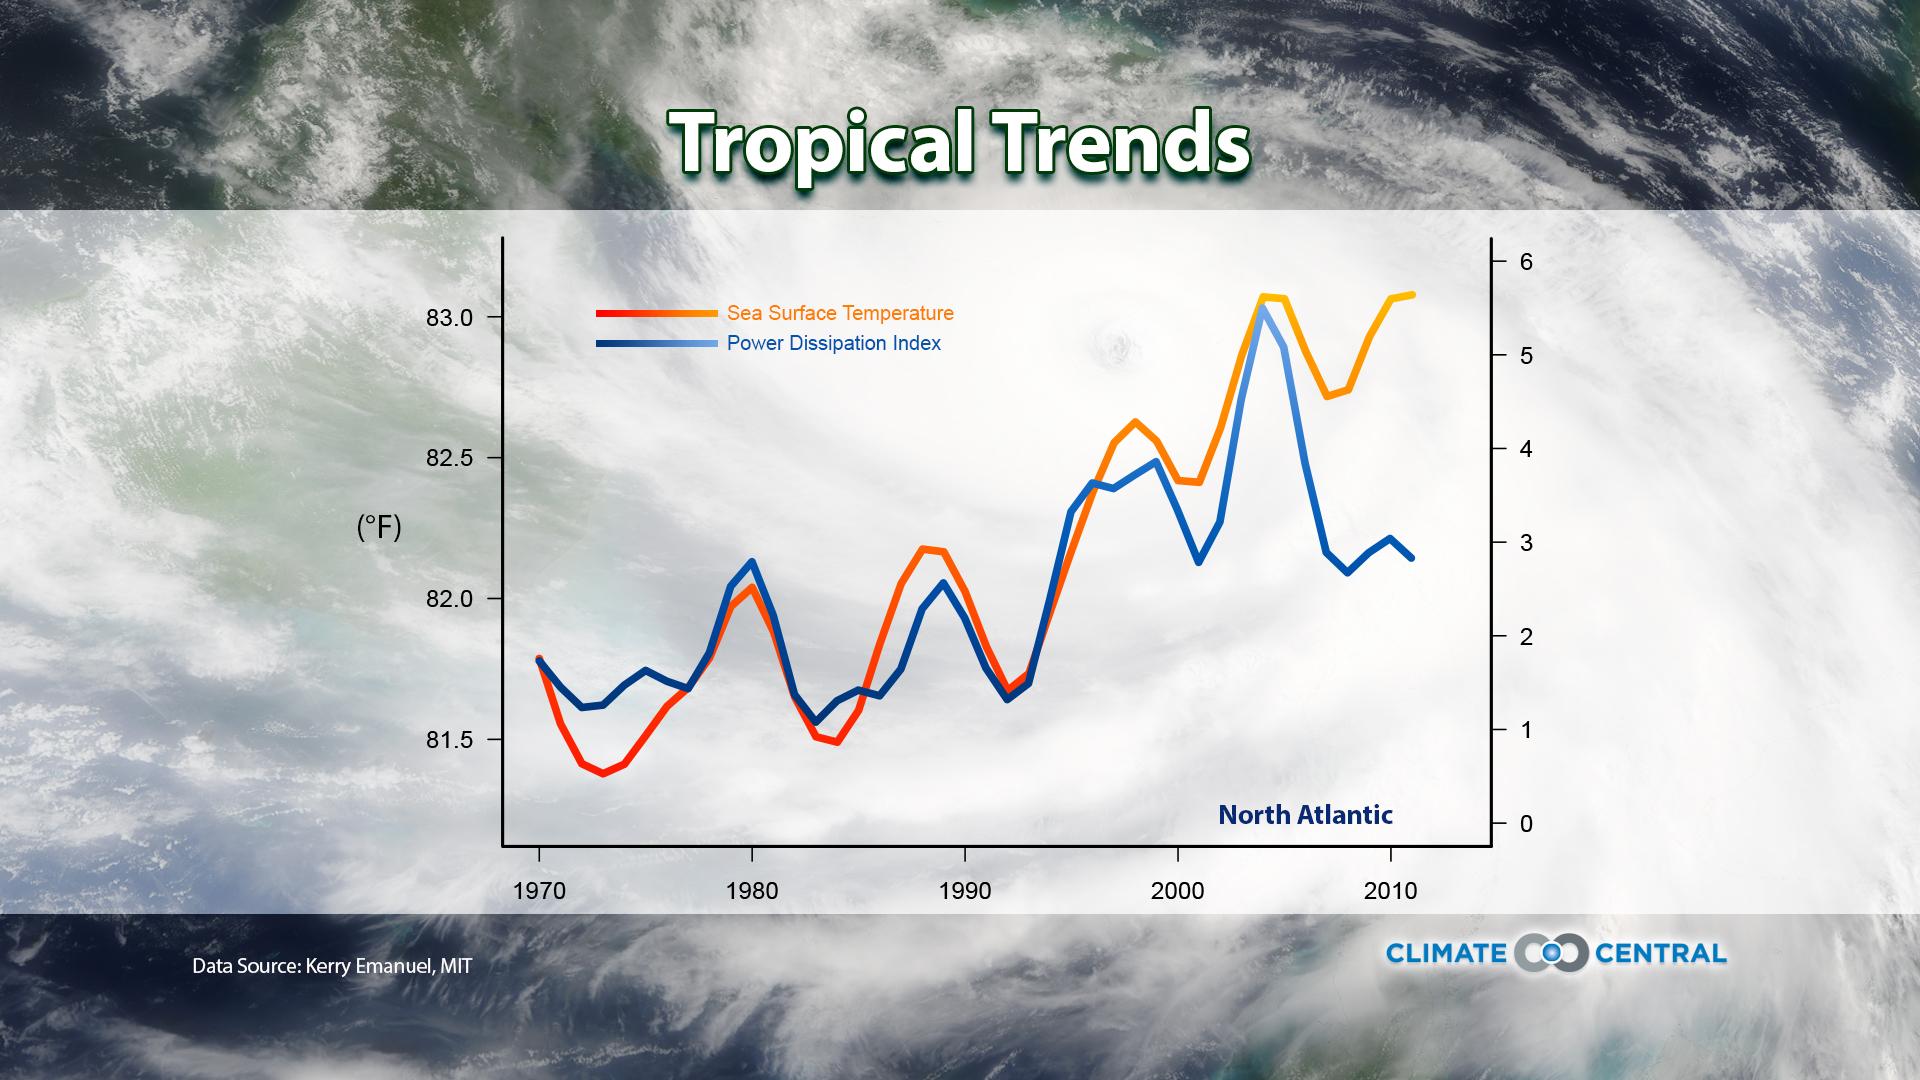 Tropical Trends: Power Dissipation Index